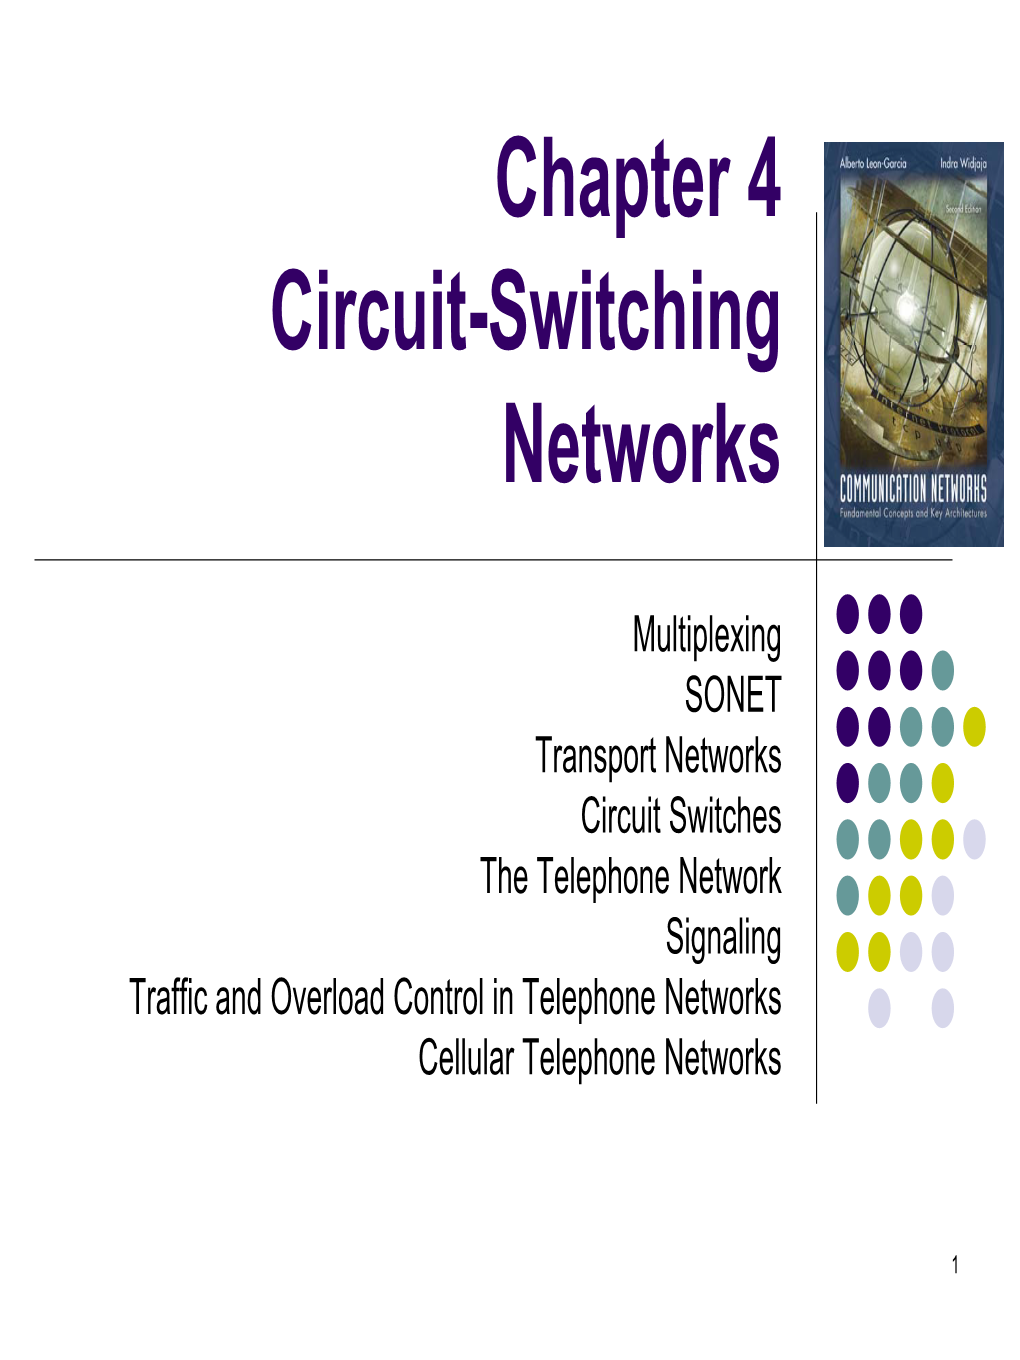 Chapter 4: Circuit-Switching Networks